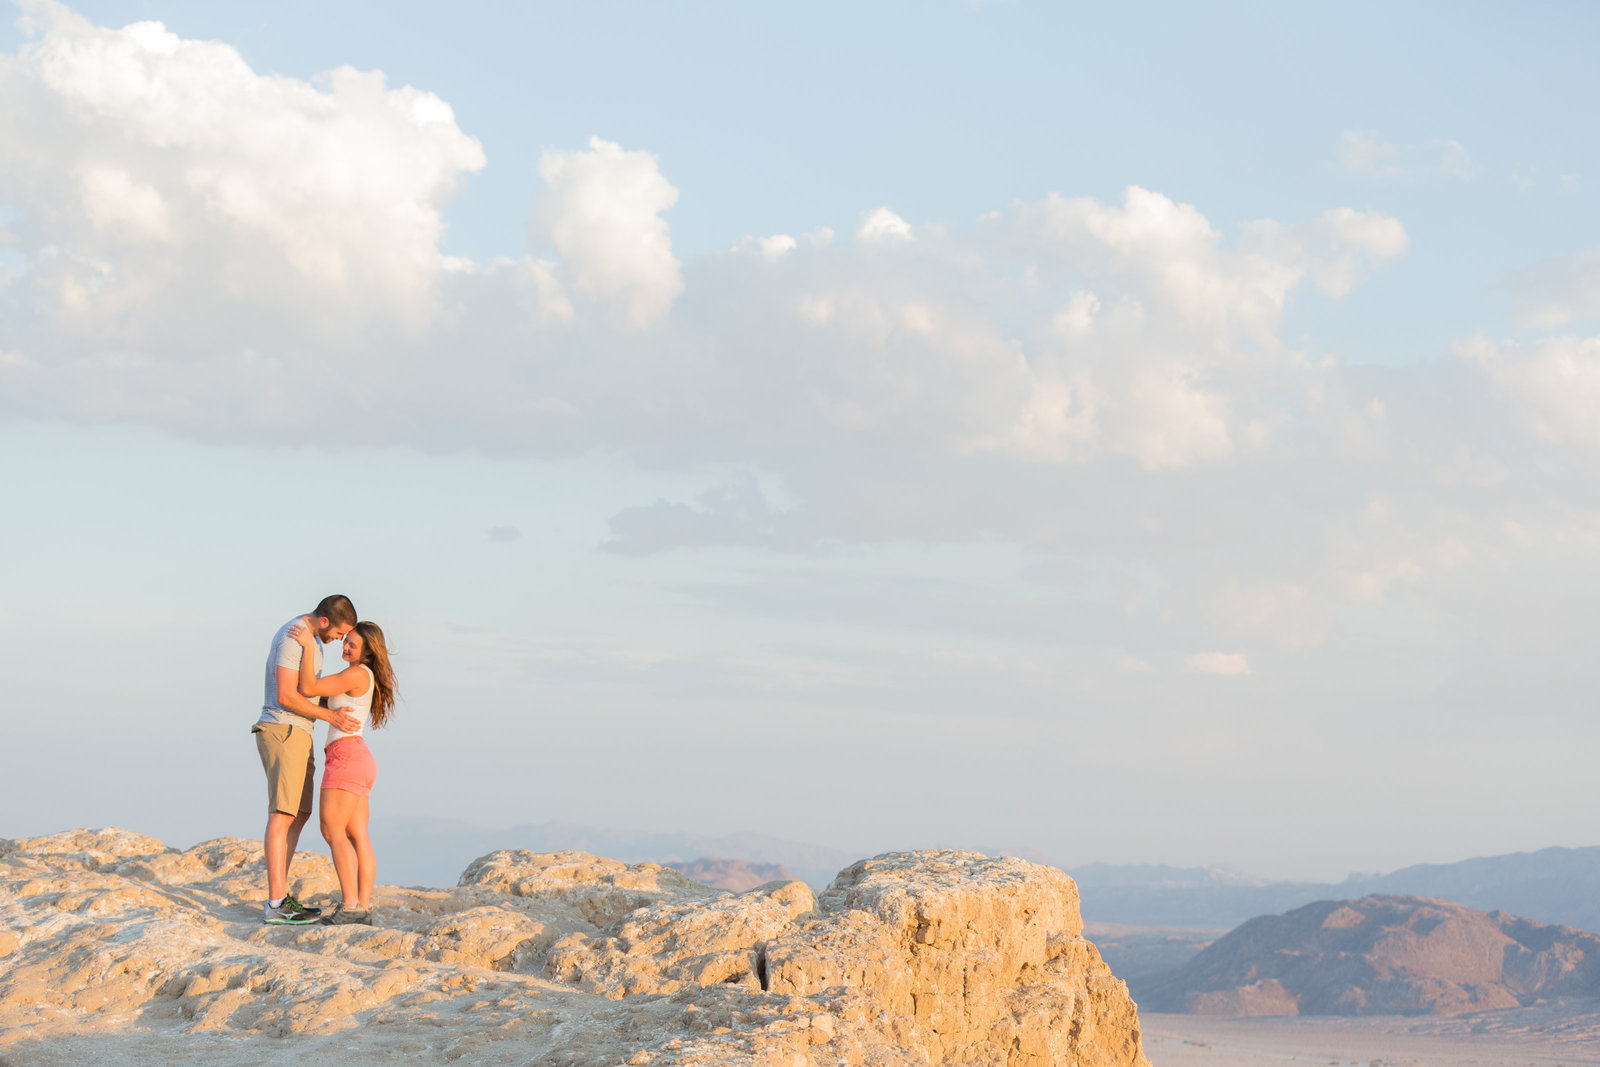 Surprise Proposal, by Southern California Wedding Photographers Erica & Brock Mendenhall